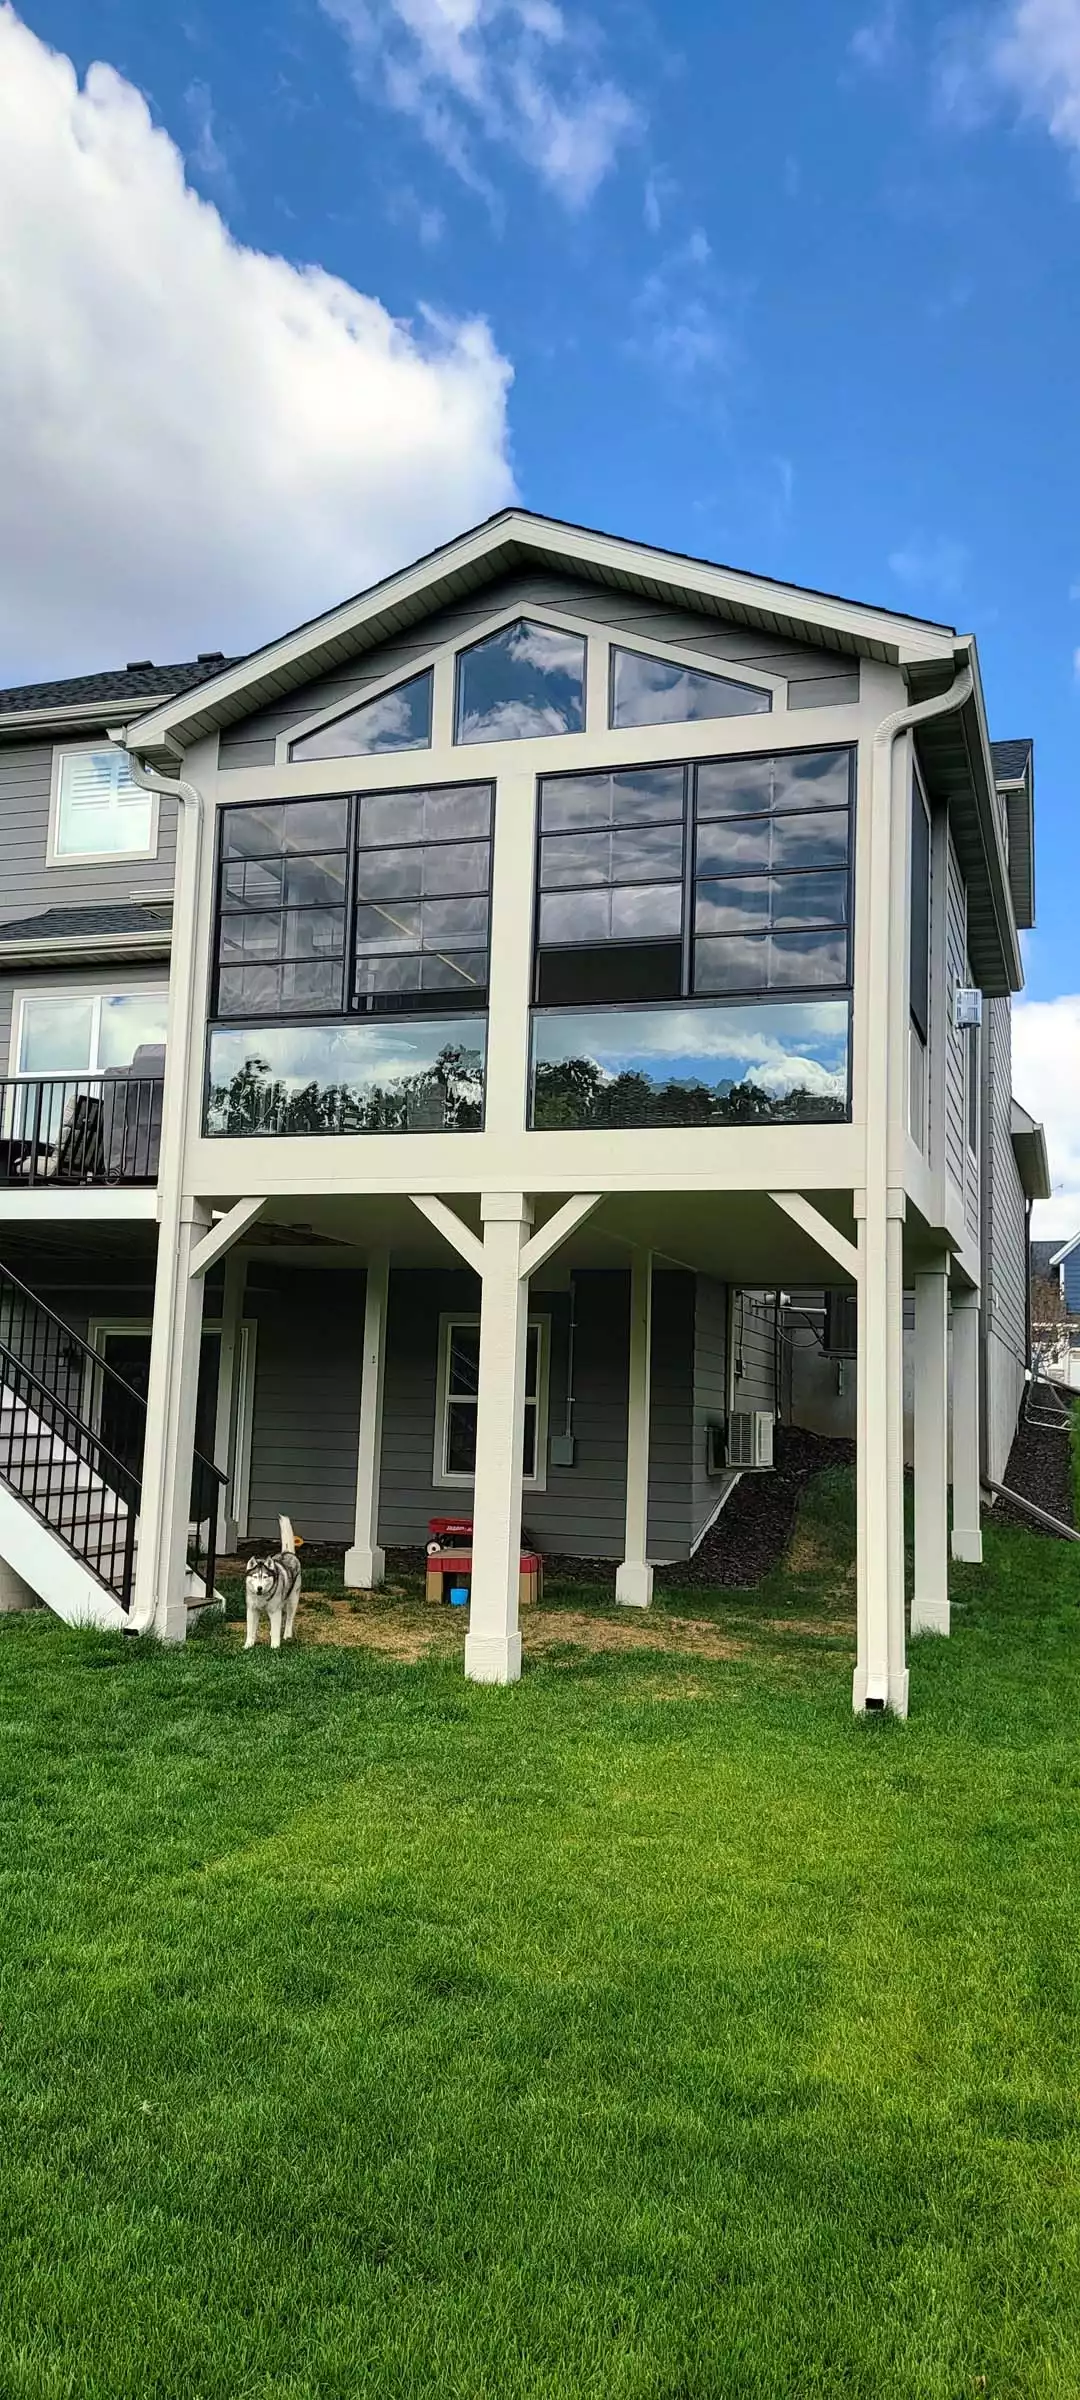 Exterior 3+ Season Porch with Floor to Ceiling Windows